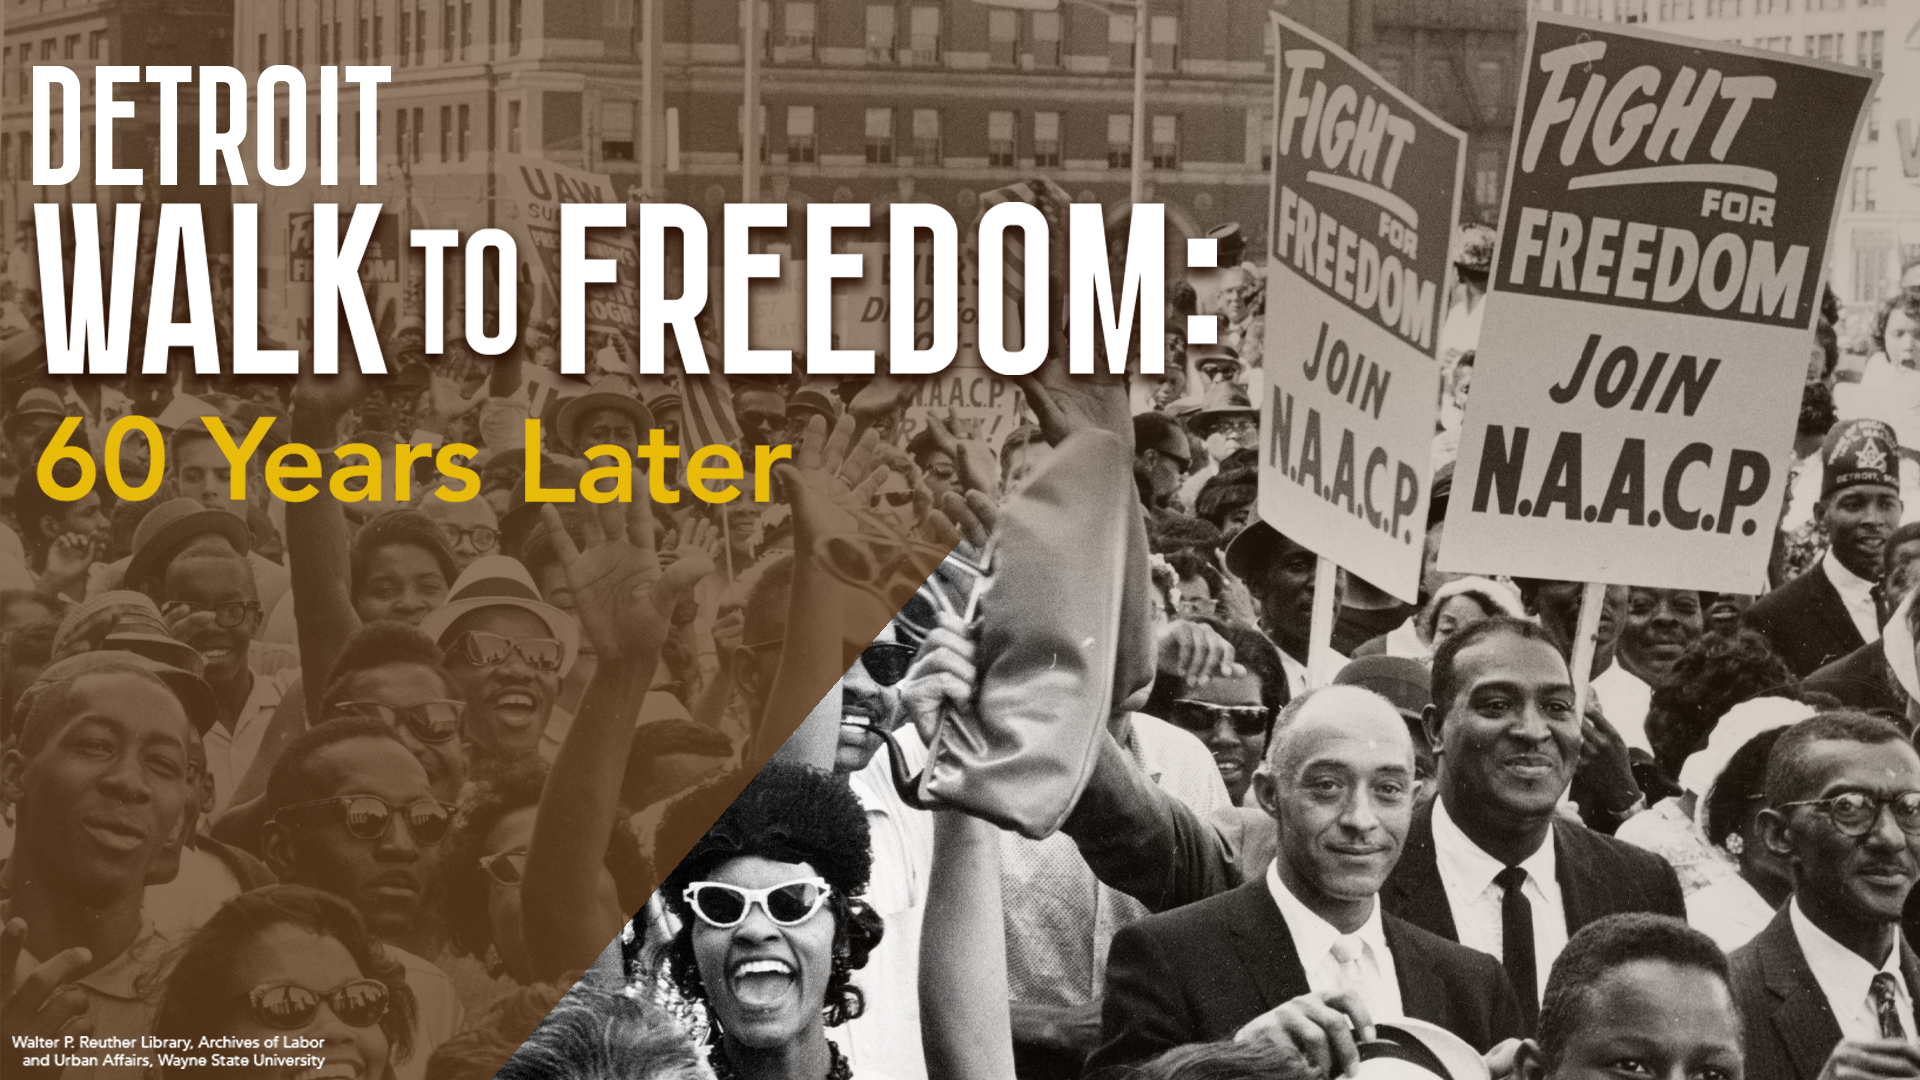 Detroit Walk to Freedom: 60 years later graphic